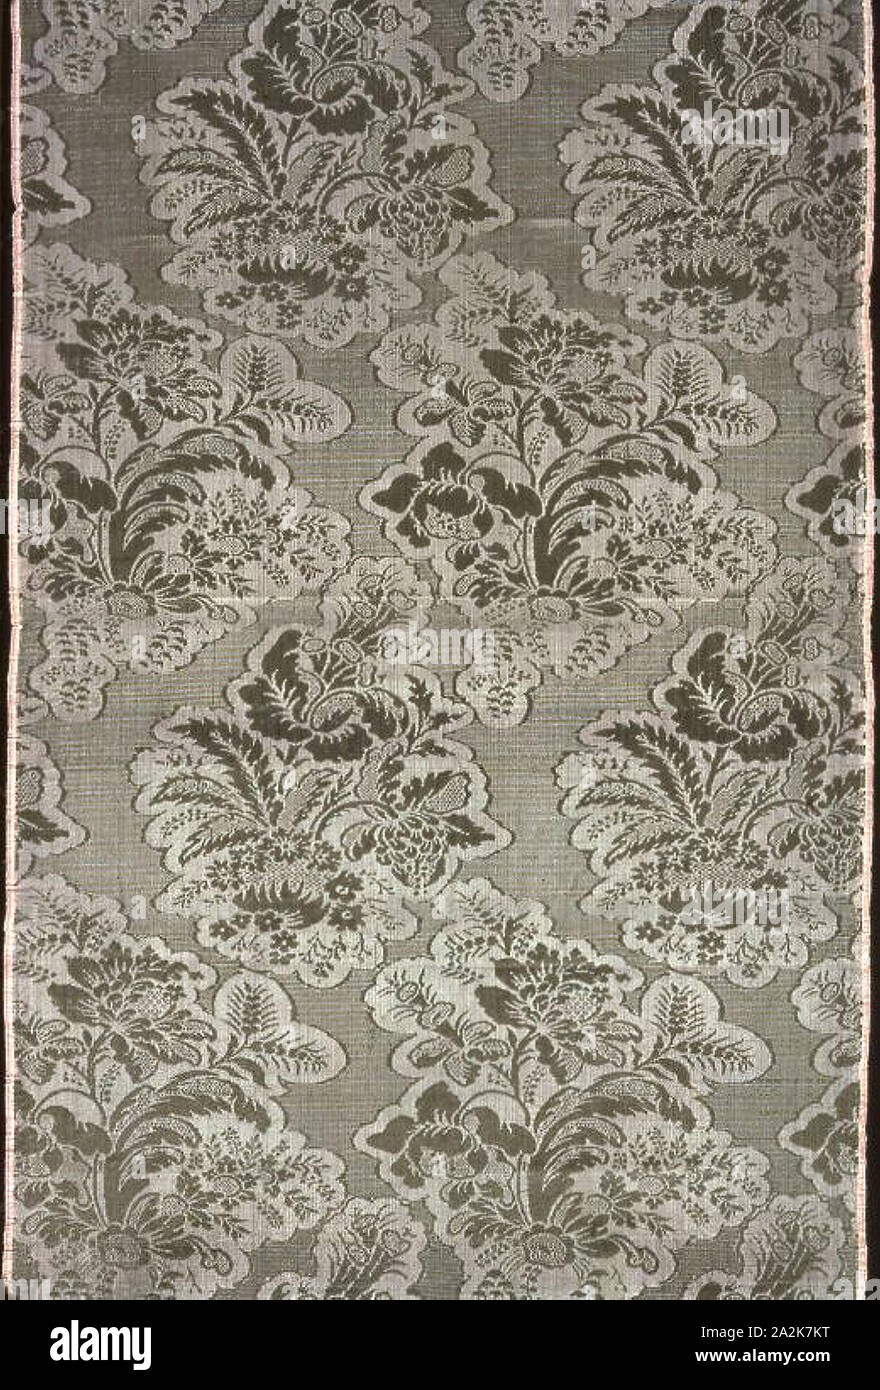 Panel, 1725/50, England or France, England, Silk, plain weave with supplementary patterning warps, 106.3 × 55.4 cm (41 7/8 × 21 7/8 in Stock Photo